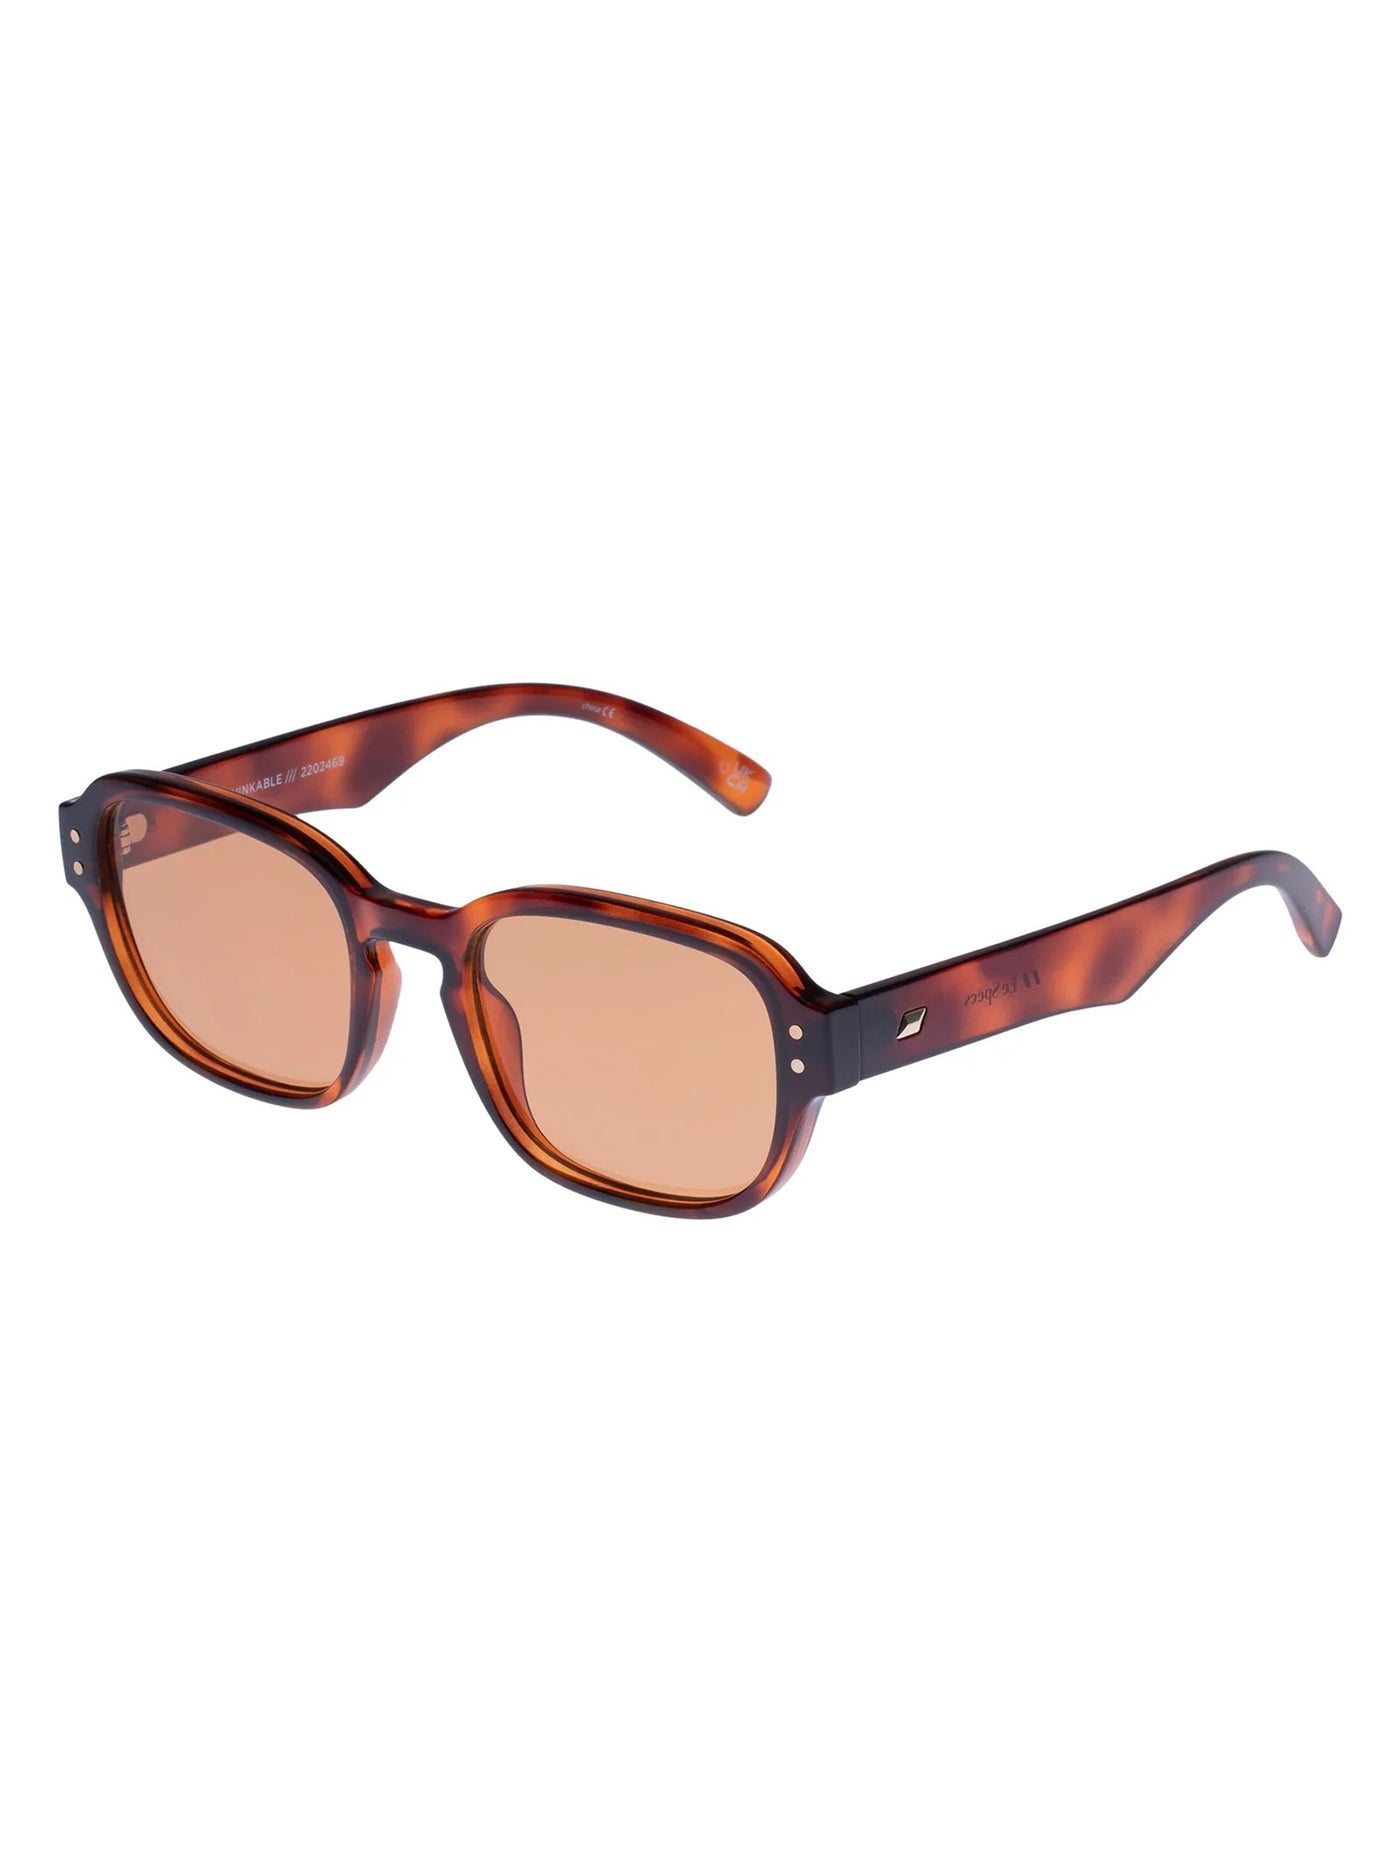 Le Specs Unthinkable Toffee Tort/Amber Tint Sunglasses